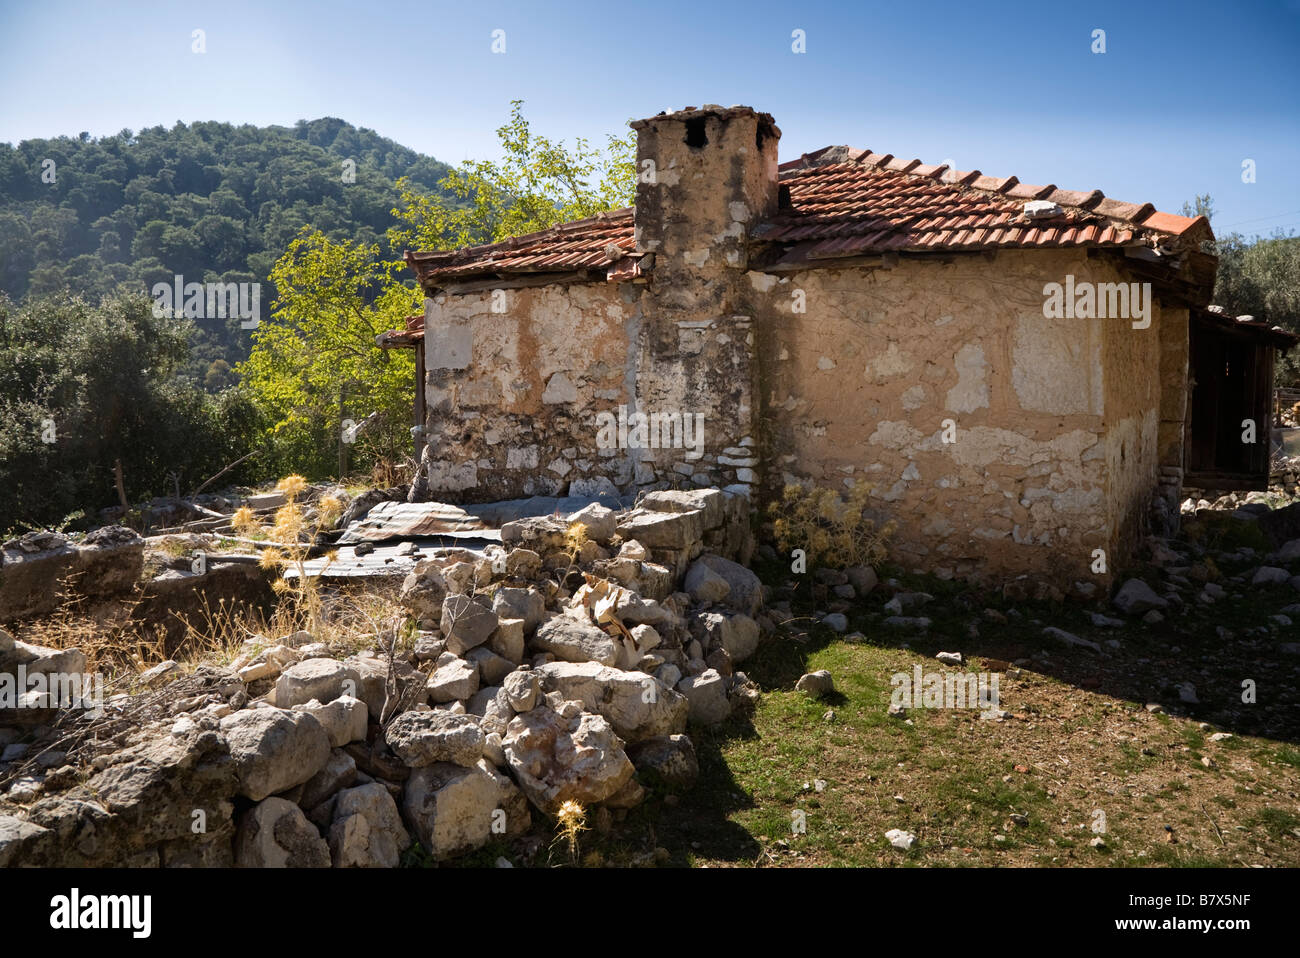 A rear view of a Turkish stone built home with a terracotta tiled roof in Sidyma villageTurkey Stock Photo